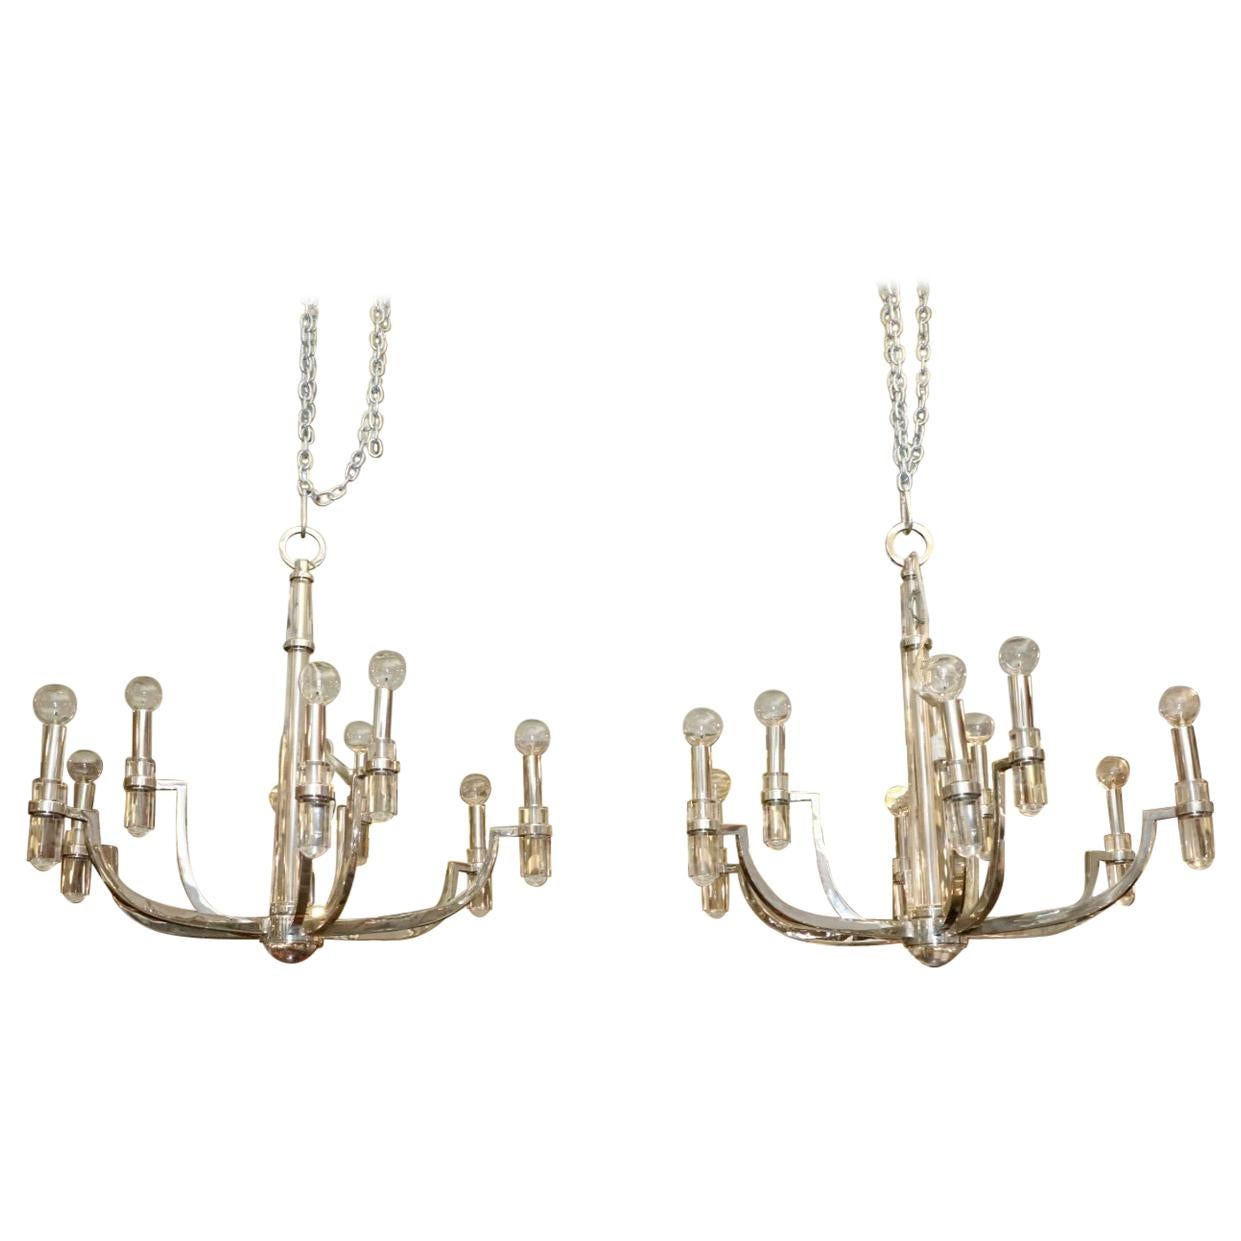 Nickel-Plated Brass, Lucite and Brass Chandeliers